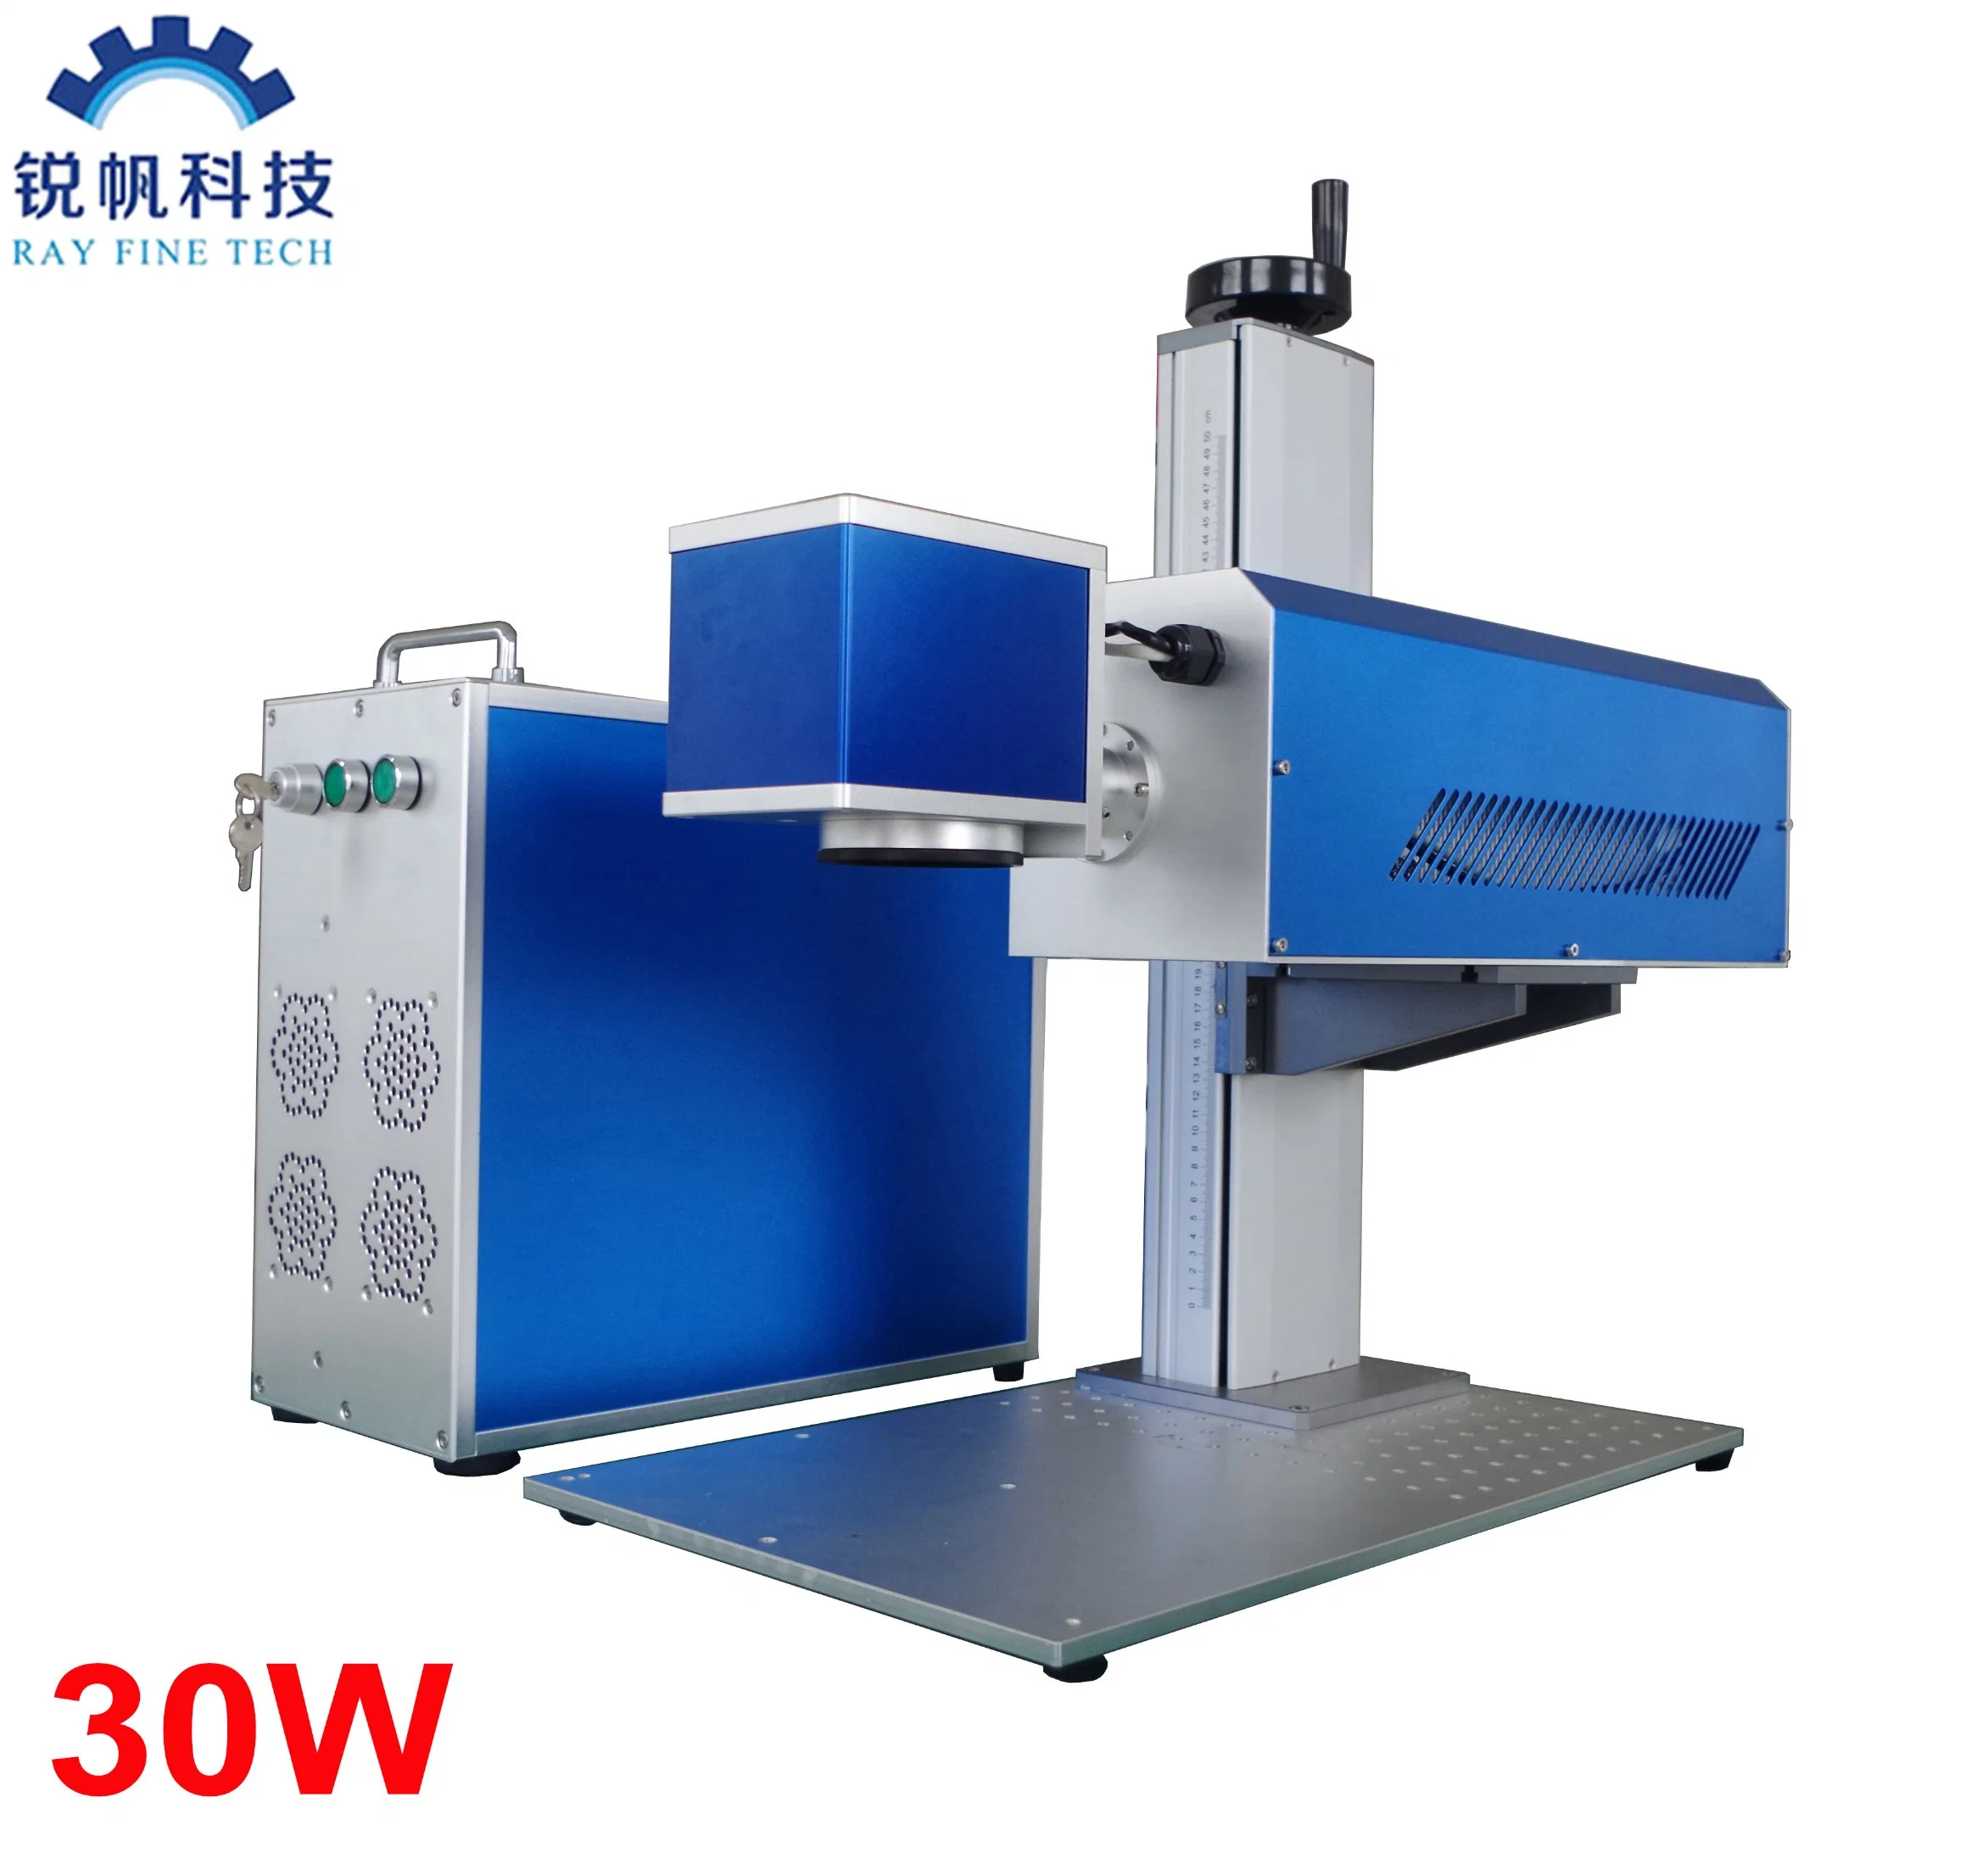 High-Precision Co2 Laser Marking Machine for Industrial Use